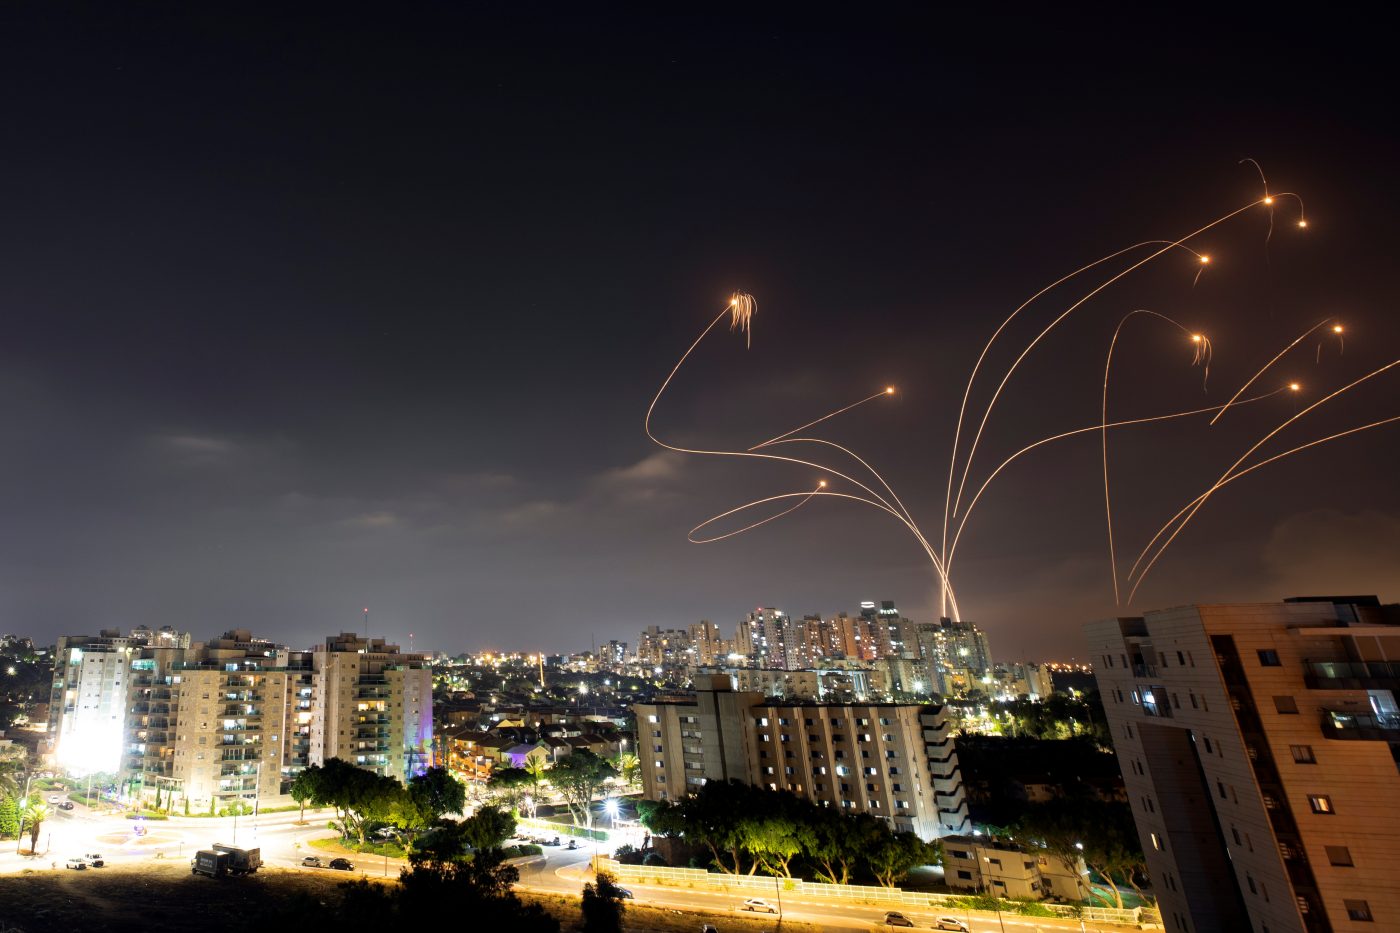 Photo: Streaks of light are seen as Israel's Iron Dome anti-missile system intercepts rockets launched from the Gaza Strip towards Israel, as seen from Ashkelon, Israel May 10, 2021. Picture taken with slow shutter speed. Credit: REUTERS/Amir Cohen